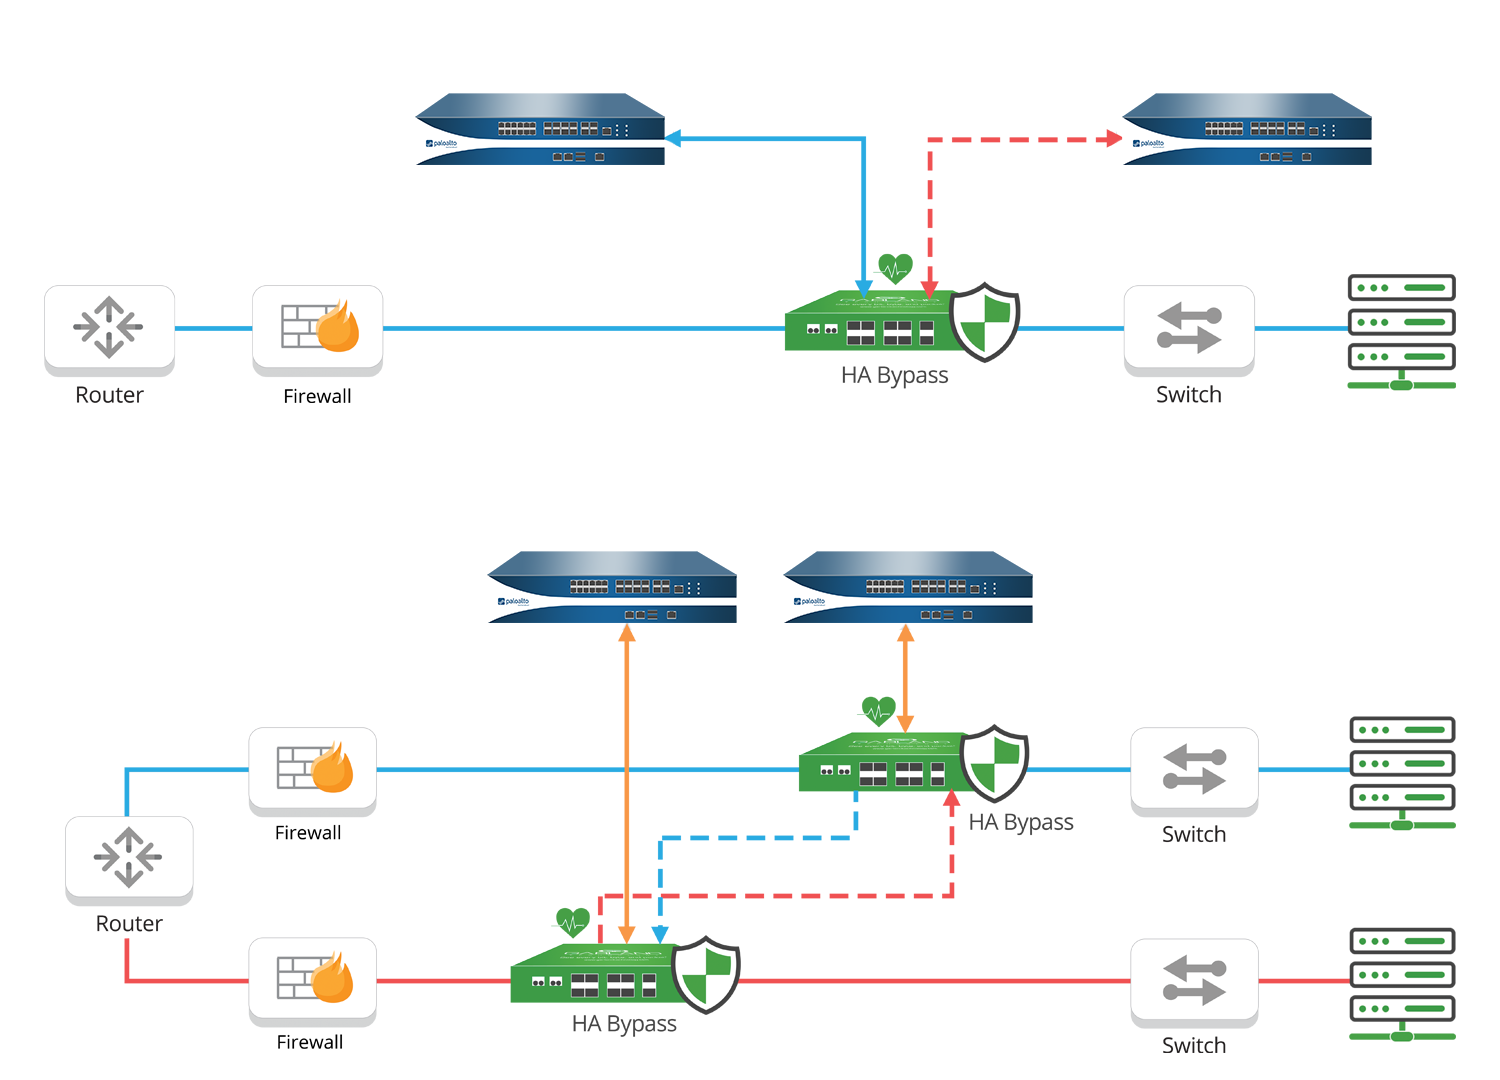 Palo Alto networks high availability solution